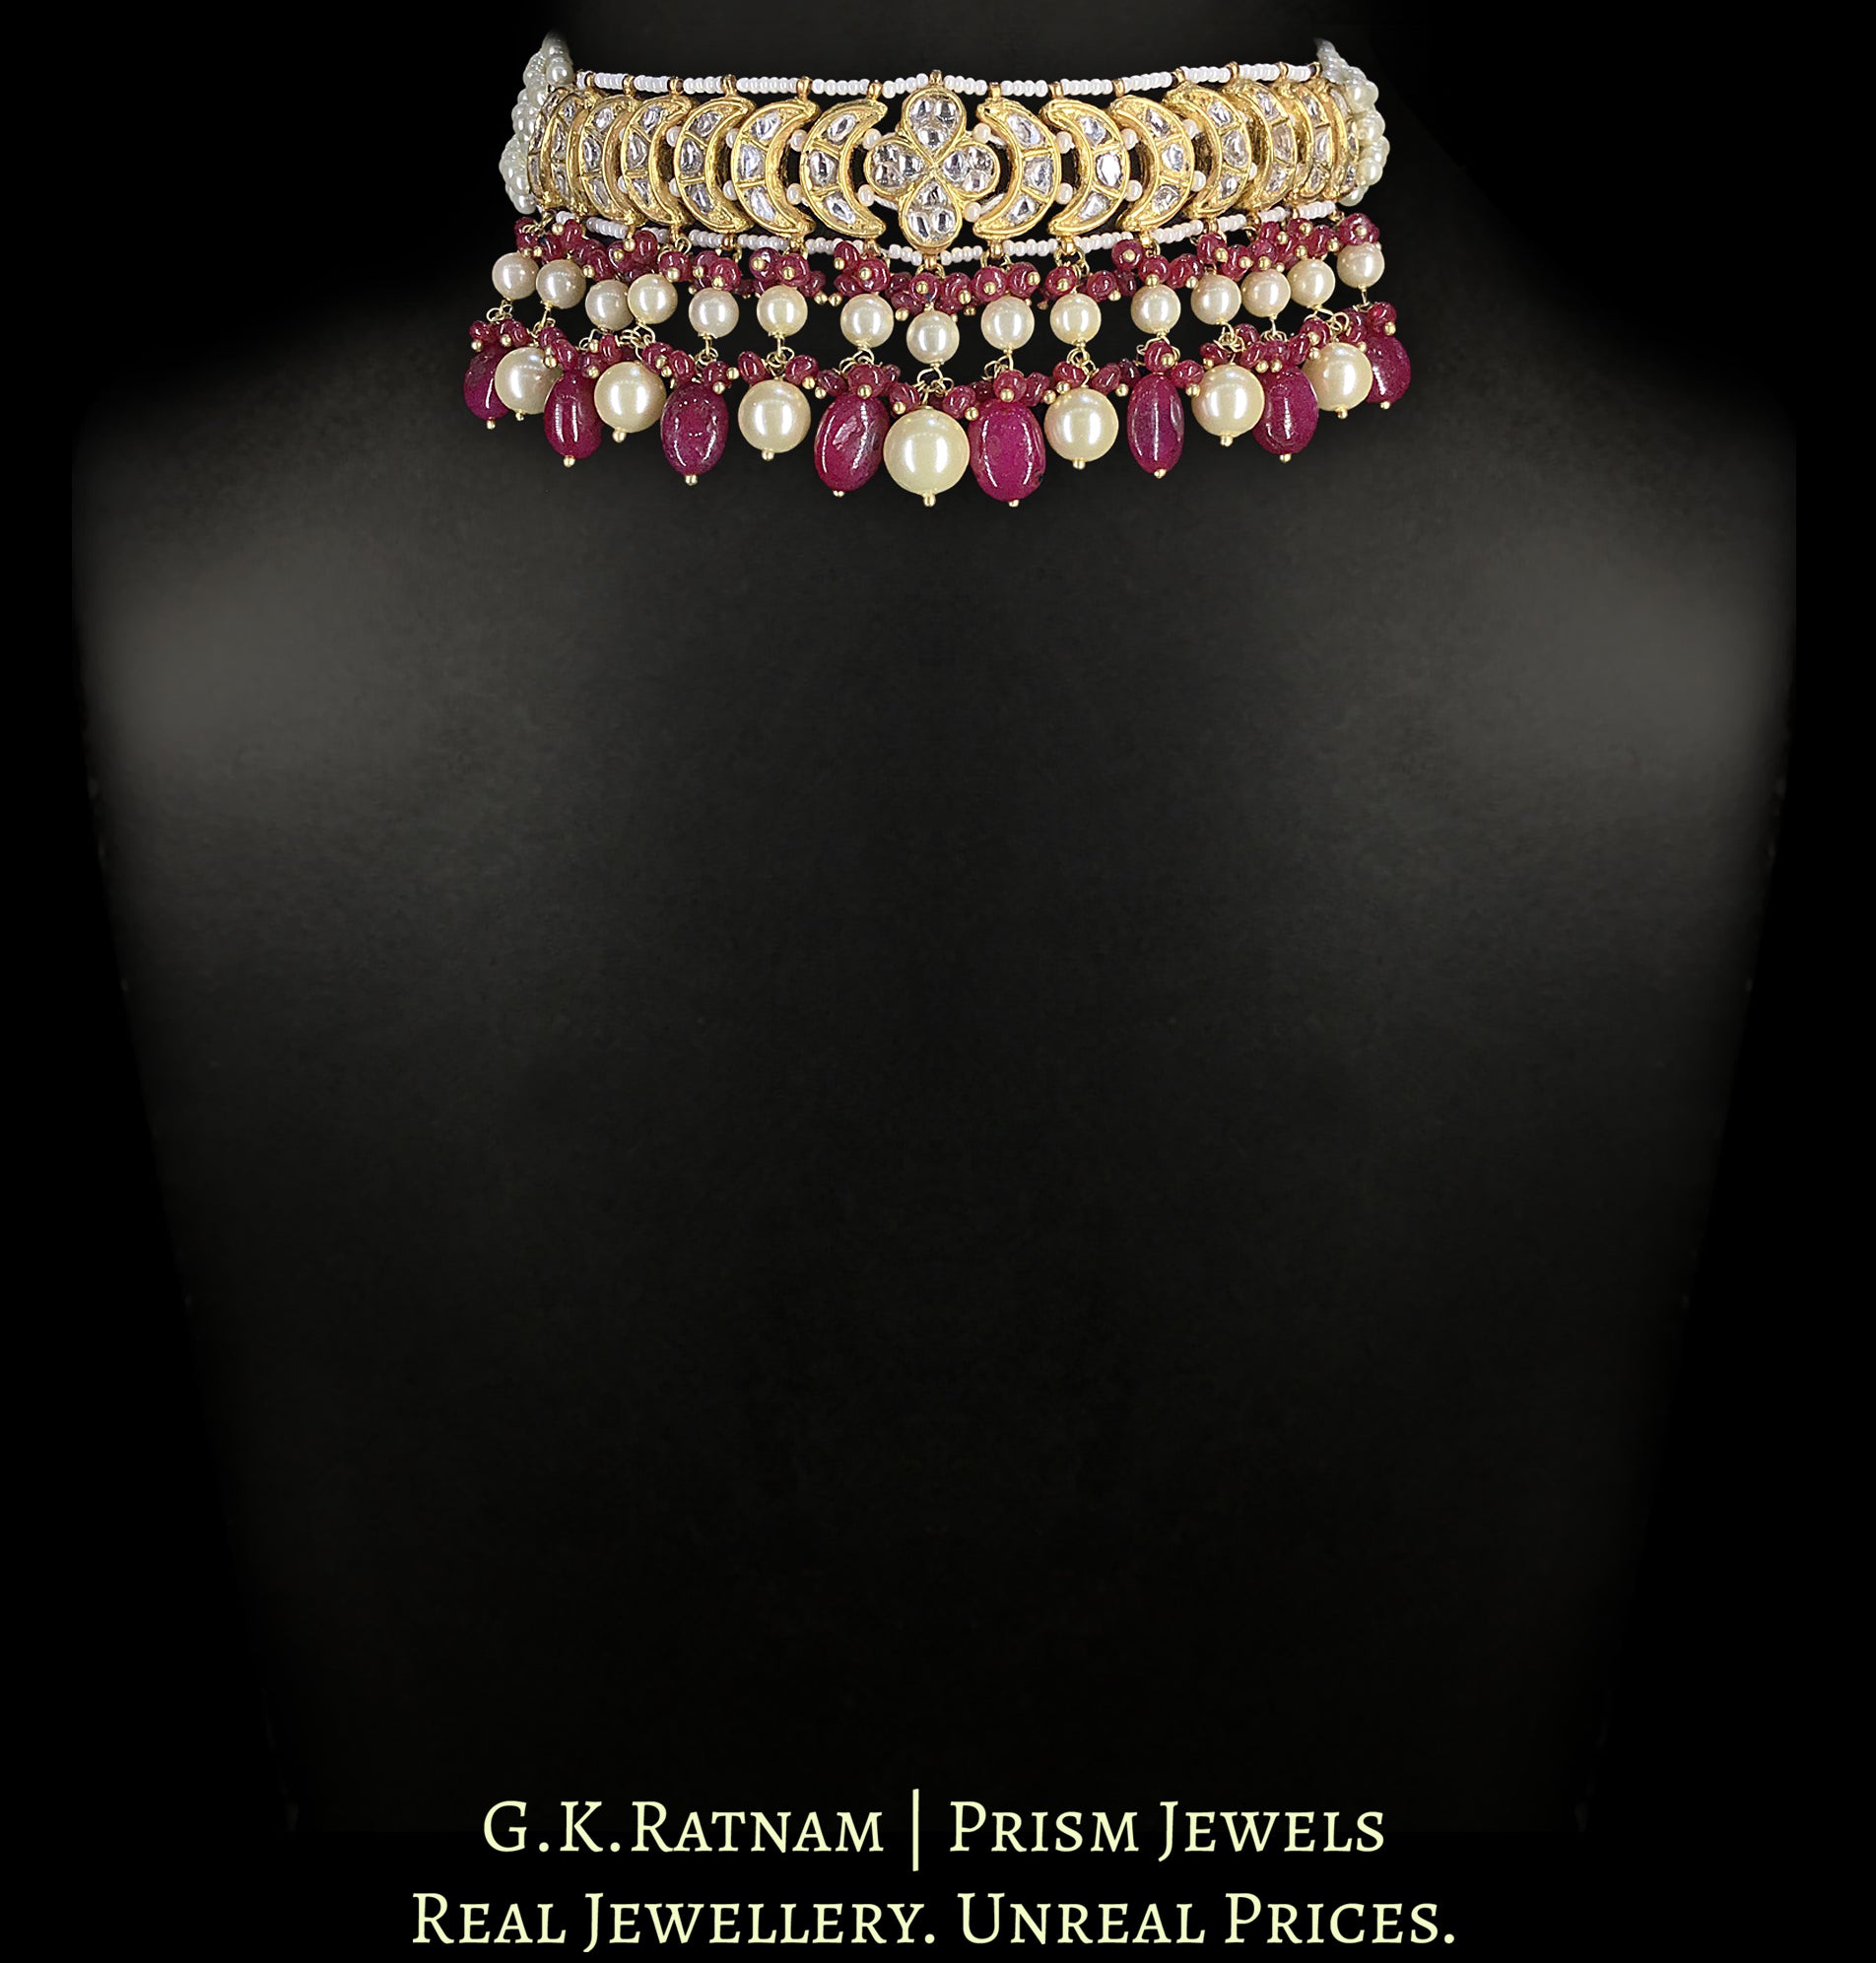 23k Gold and Diamond Polki Choker Necklace Set with Rubies